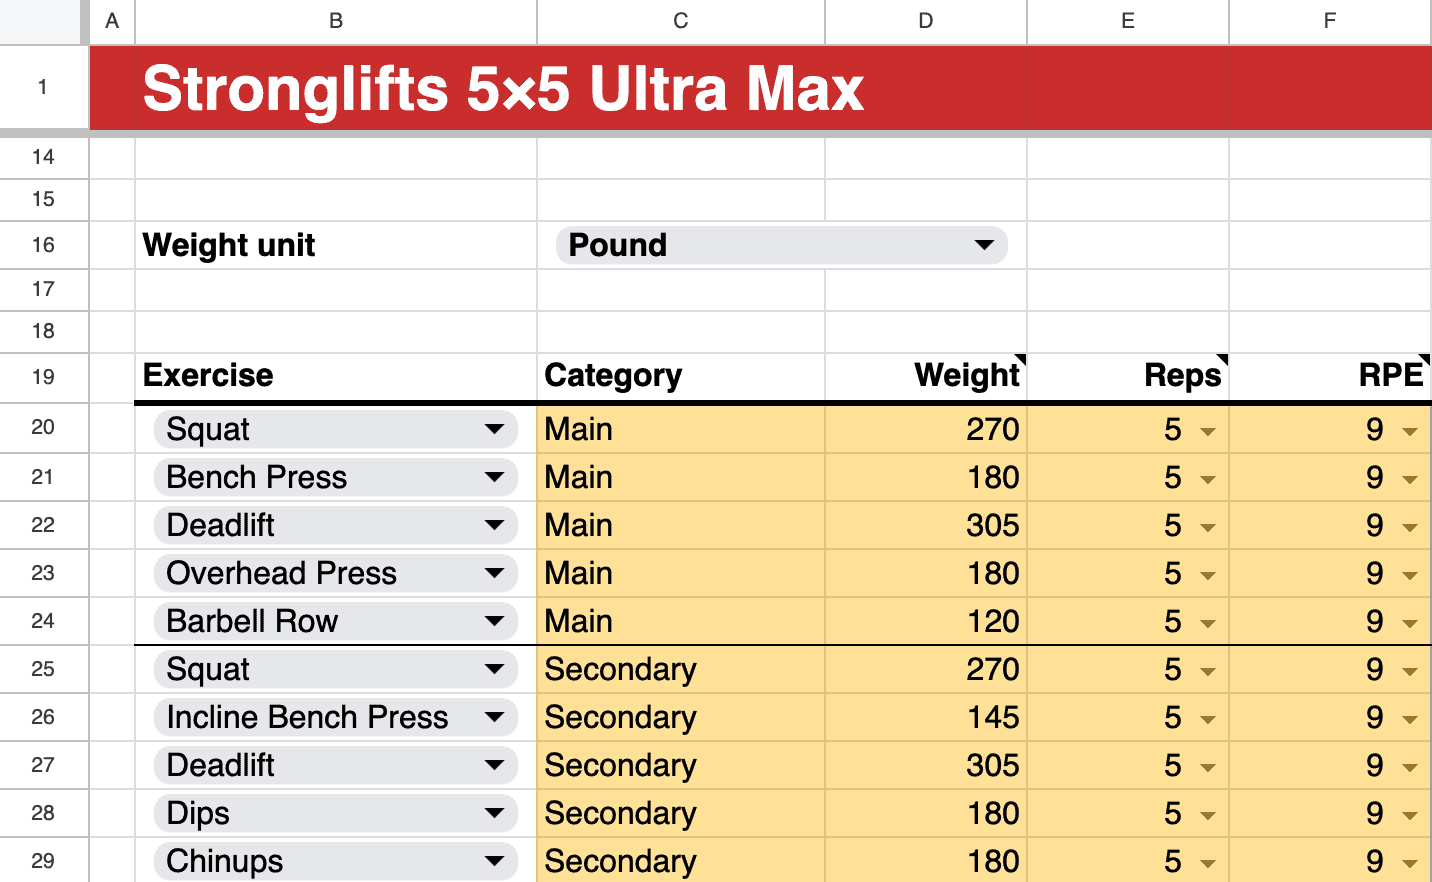 Enter your best lifts in the Stronglifts 5x5 Ultra Max spreadsheet